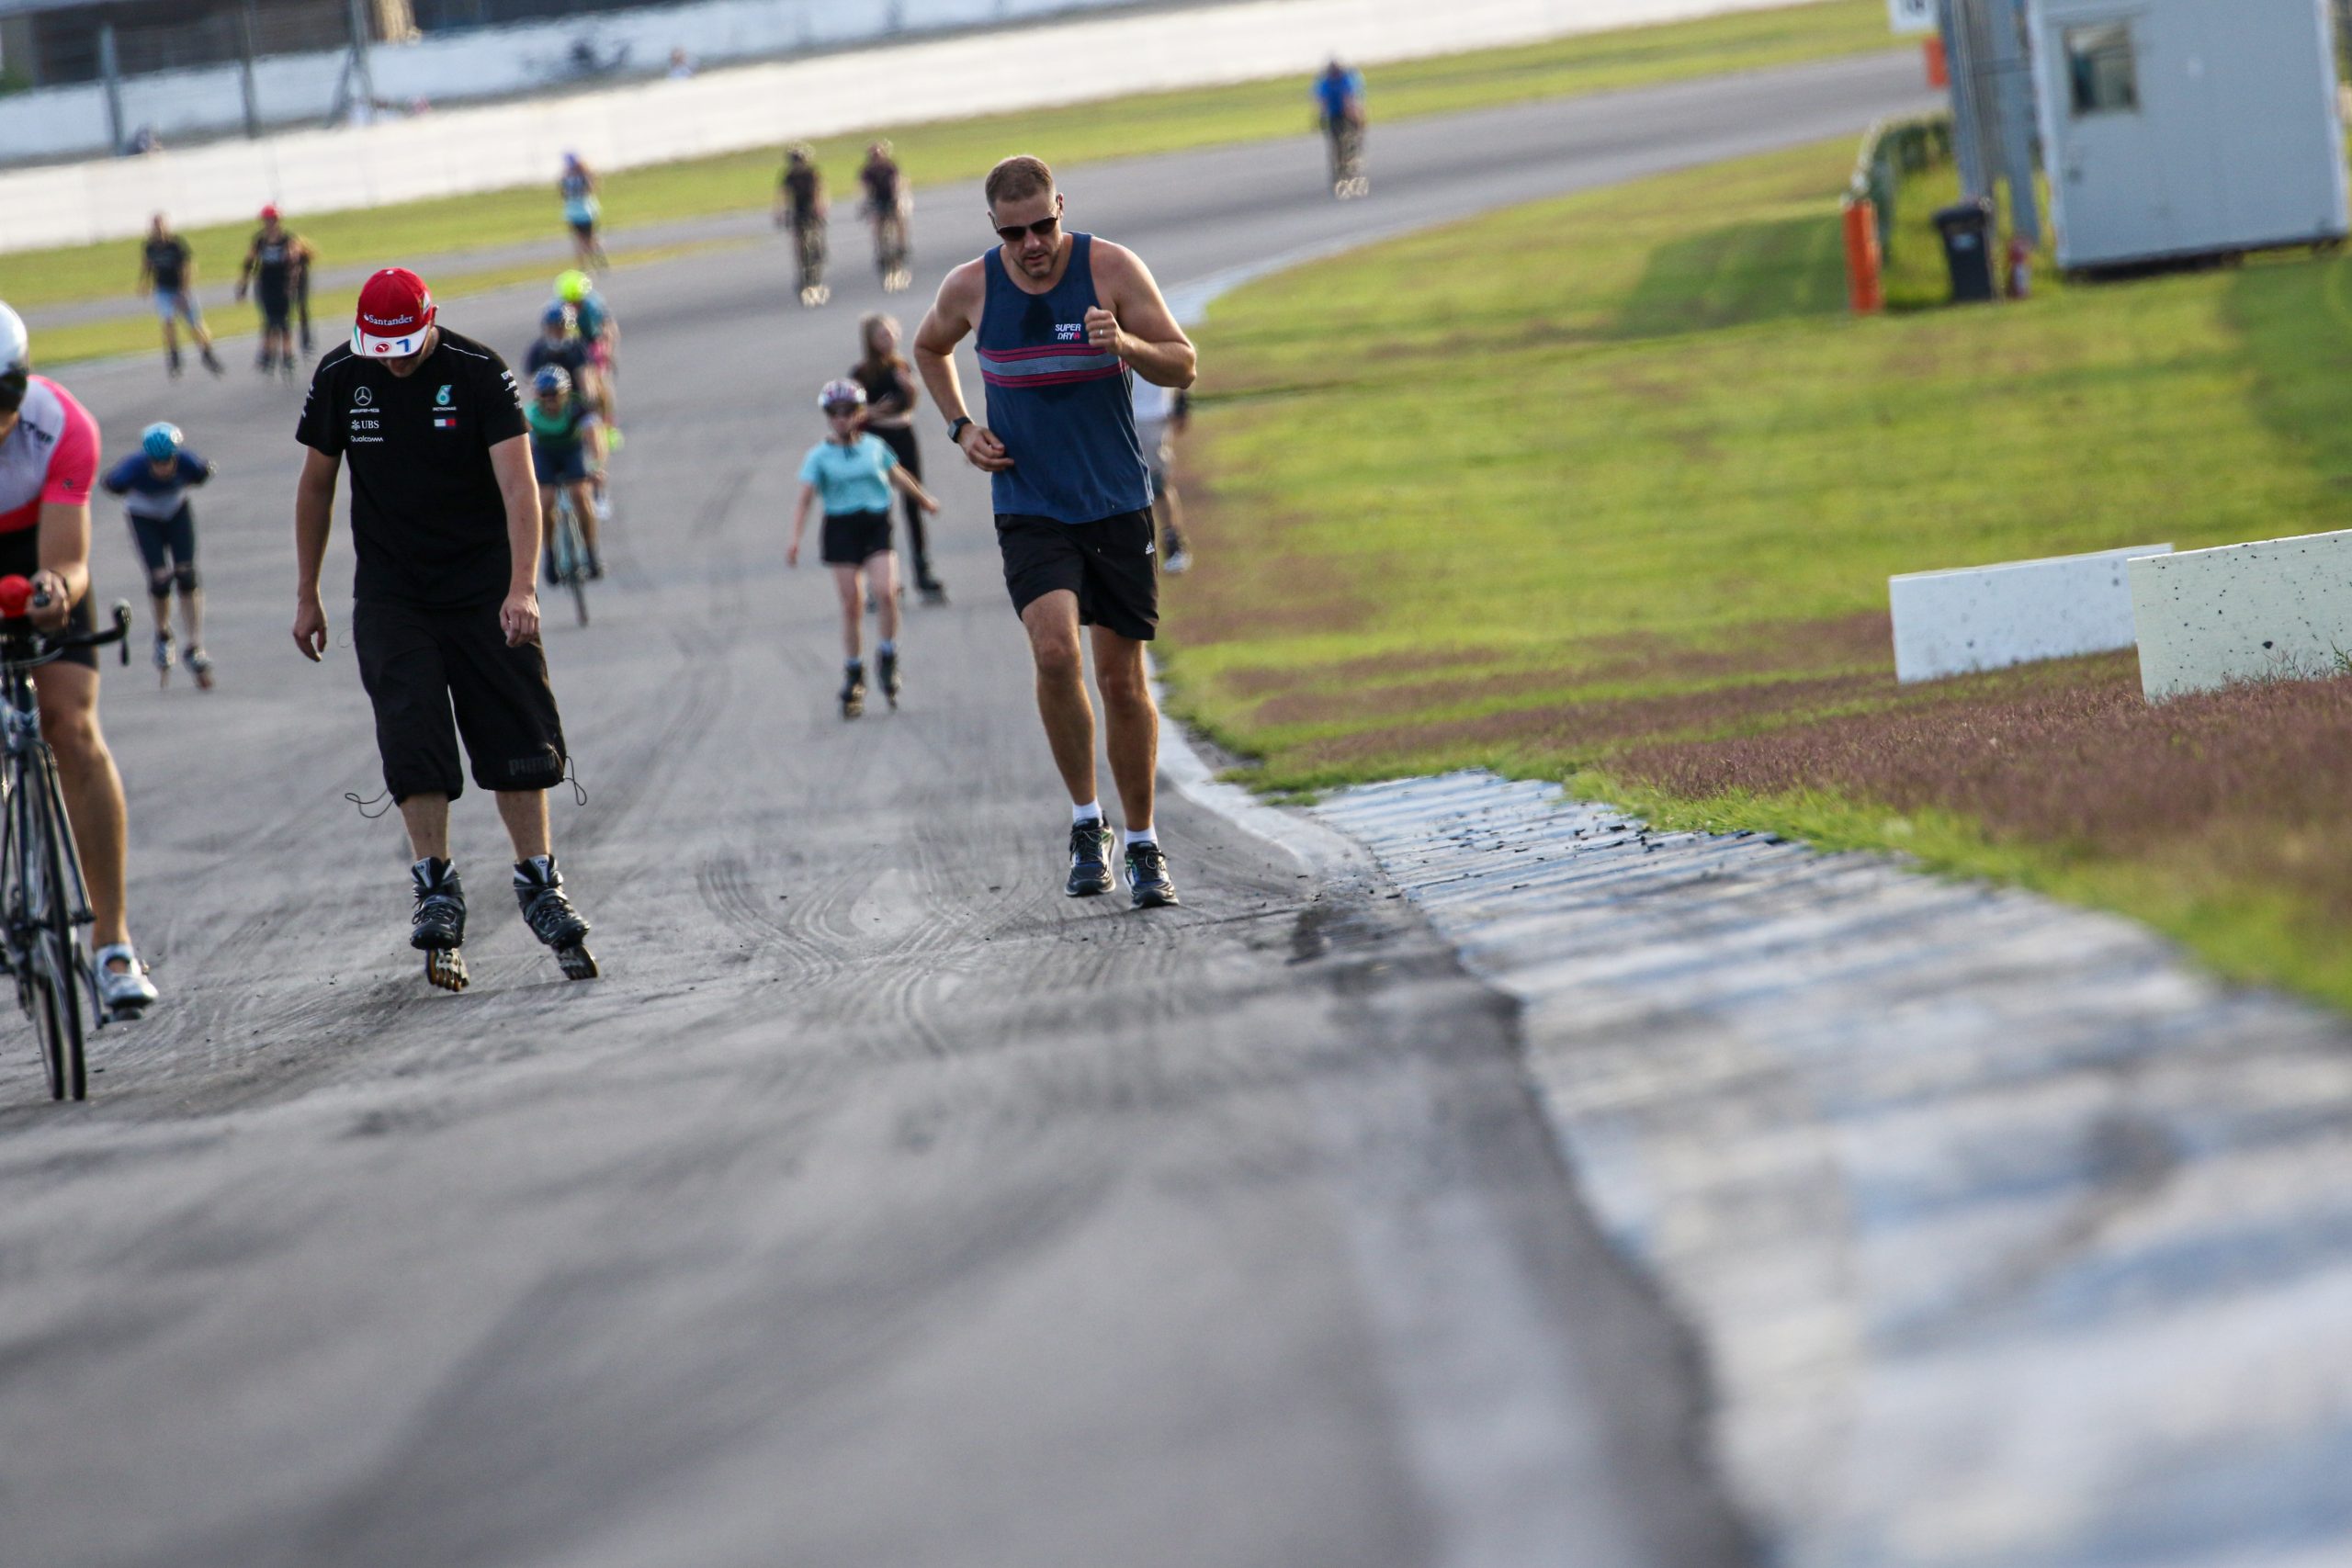 Test the route on June 15 at Fit on Track!